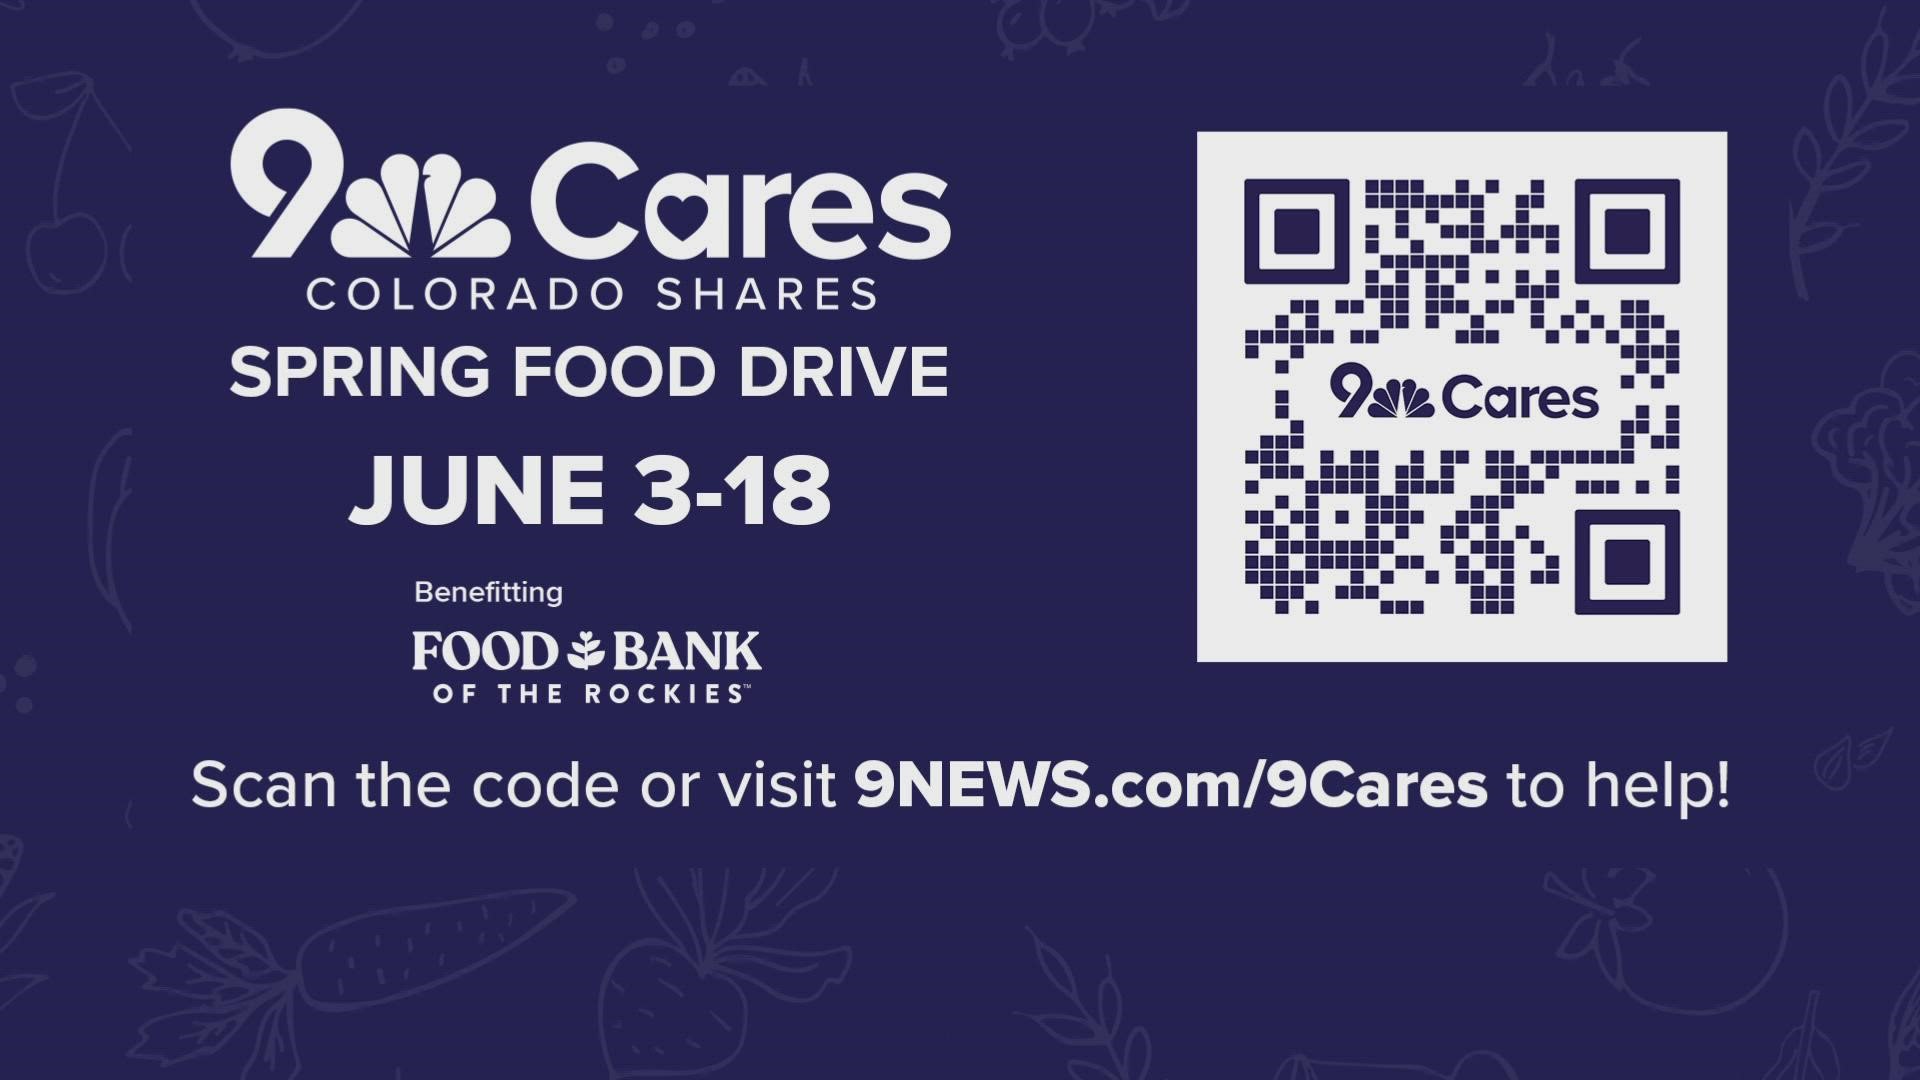 9NEWS, Food Bank of the Rockies, and King Soopers come together for 9Cares Colorado Shares Summer 2022 Food Drive